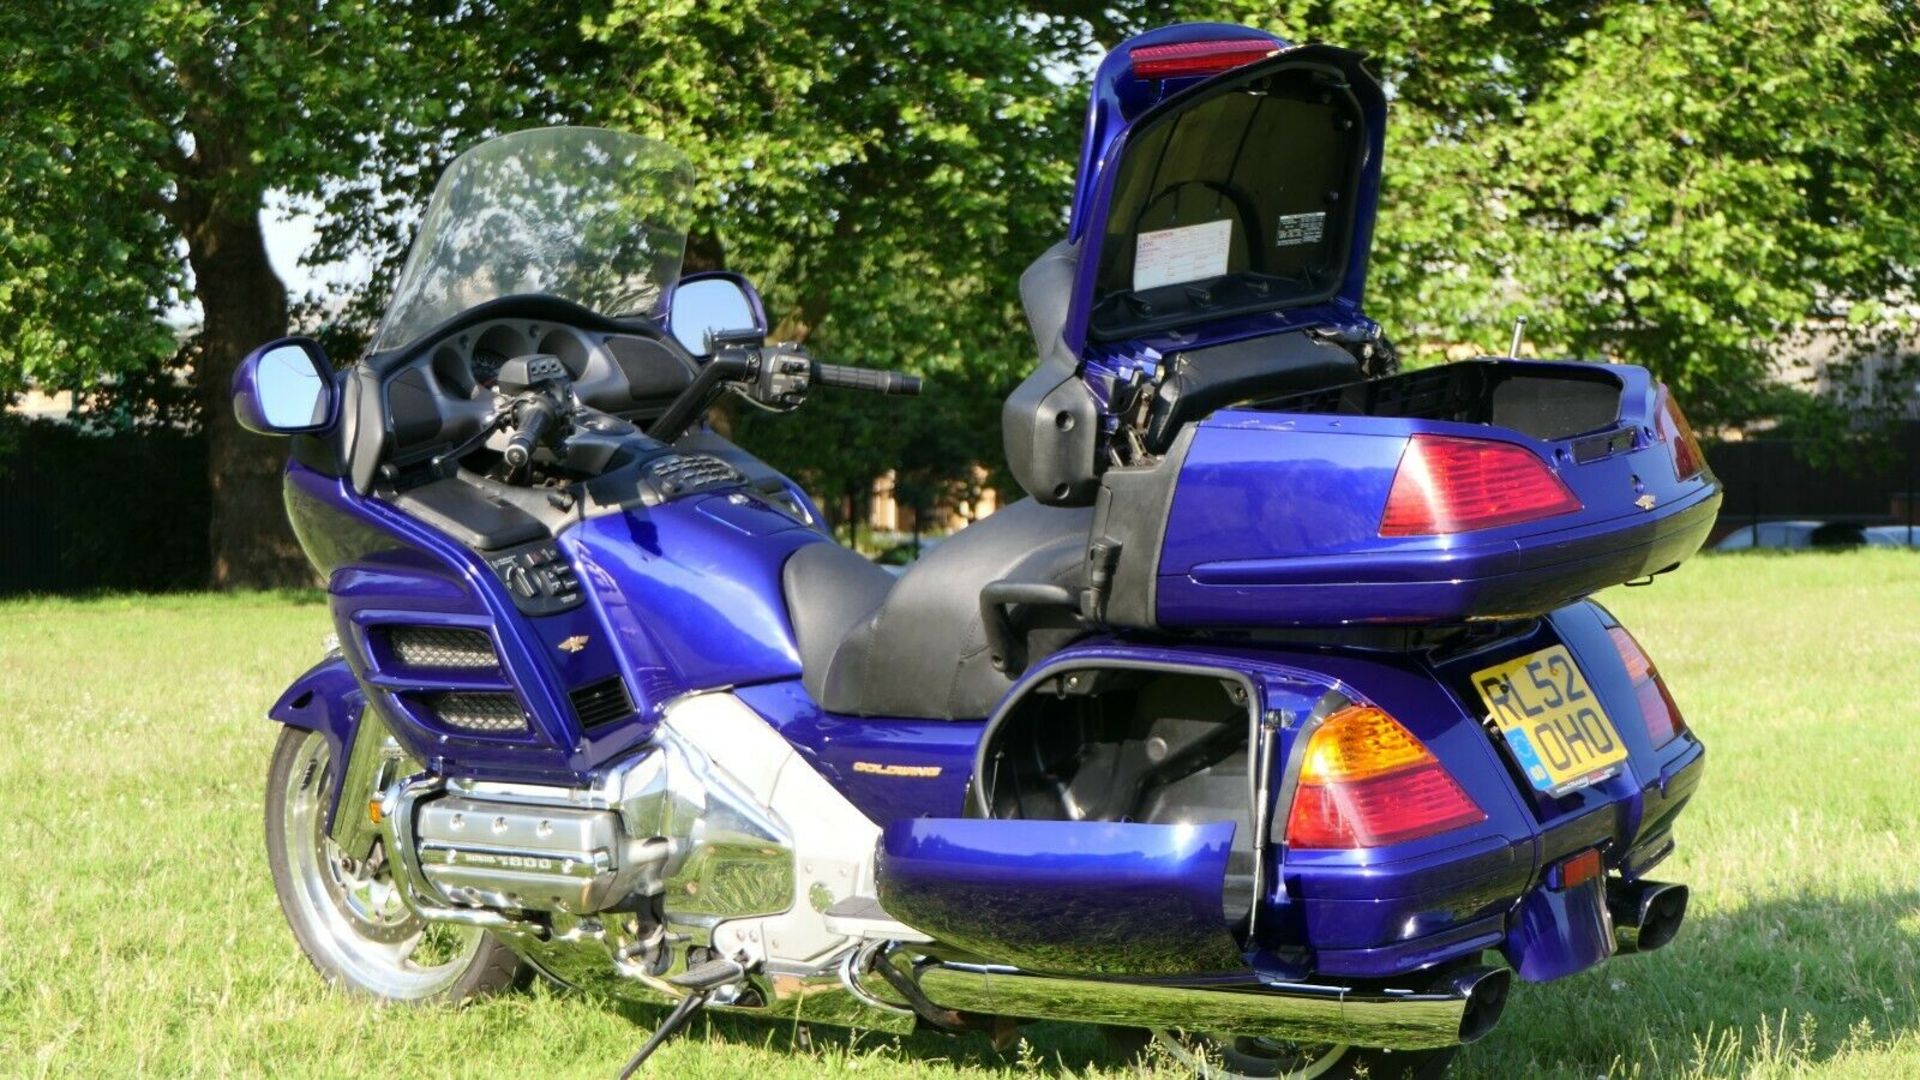 HONDA GL1800 GOLDWING ABS 2003 MOTORCYCLE 51K MILES - EXTRAS, MOT, LOW MILES, FSH, GREAT CONDITION - Image 4 of 12